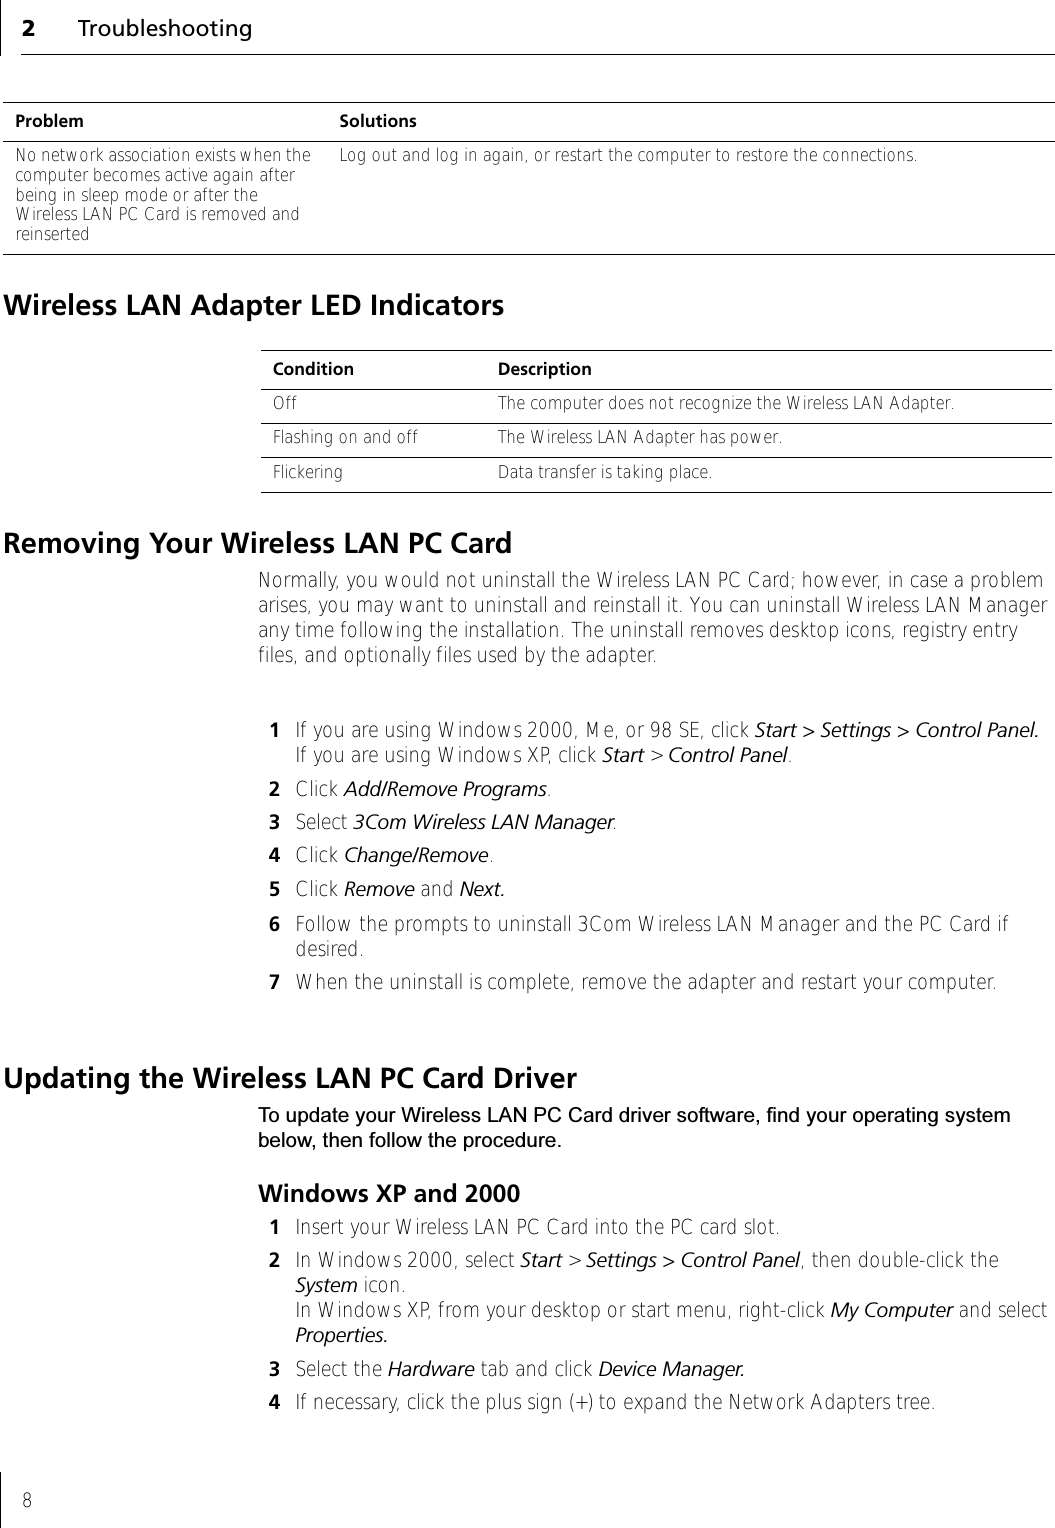 2Troubleshooting8Wireless LAN Adapter LED IndicatorsRemoving Your Wireless LAN PC CardNormally, you would not uninstall the Wireless LAN PC Card; however, in case a problem arises, you may want to uninstall and reinstall it. You can uninstall Wireless LAN Manager any time following the installation. The uninstall removes desktop icons, registry entry files, and optionally files used by the adapter.1If you are using Windows 2000, Me, or 98 SE, click Start &gt; Settings &gt; Control Panel.  If you are using Windows XP, click Start &gt; Control Panel.2Click Add/Remove Programs.3Select 3Com Wireless LAN Manager.4Click Change/Remove.5Click Remove and Next.6Follow the prompts to uninstall 3Com Wireless LAN Manager and the PC Card if desired.7When the uninstall is complete, remove the adapter and restart your computer.Updating the Wireless LAN PC Card DriverTo update your Wireless LAN PC Card driver software, find your operating system below, then follow the procedure.Windows XP and 20001Insert your Wireless LAN PC Card into the PC card slot.2In Windows 2000, select Start &gt; Settings &gt; Control Panel, then double-click the System icon. In Windows XP, from your desktop or start menu, right-click My Computer and select Properties.3Select the Hardware tab and click Device Manager.4If necessary, click the plus sign (+) to expand the Network Adapters tree.No network association exists when the computer becomes active again after being in sleep mode or after the Wireless LAN PC Card is removed and reinsertedLog out and log in again, or restart the computer to restore the connections.Problem SolutionsCondition DescriptionOff The computer does not recognize the Wireless LAN Adapter.Flashing on and off The Wireless LAN Adapter has power. Flickering Data transfer is taking place.